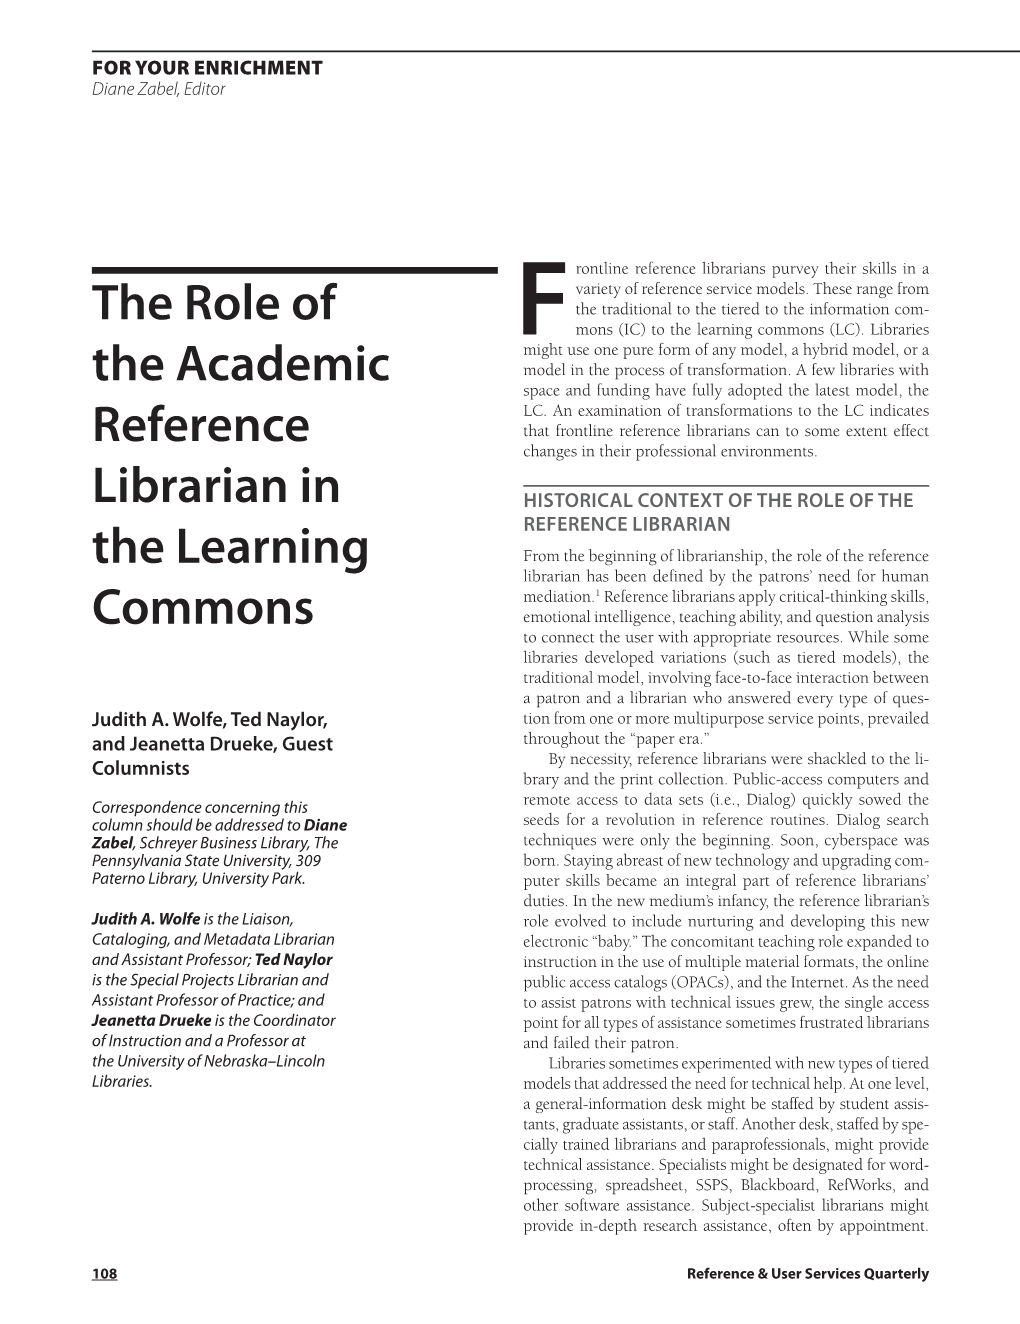 The Role of the Academic Reference Librarian in the Learning Commons